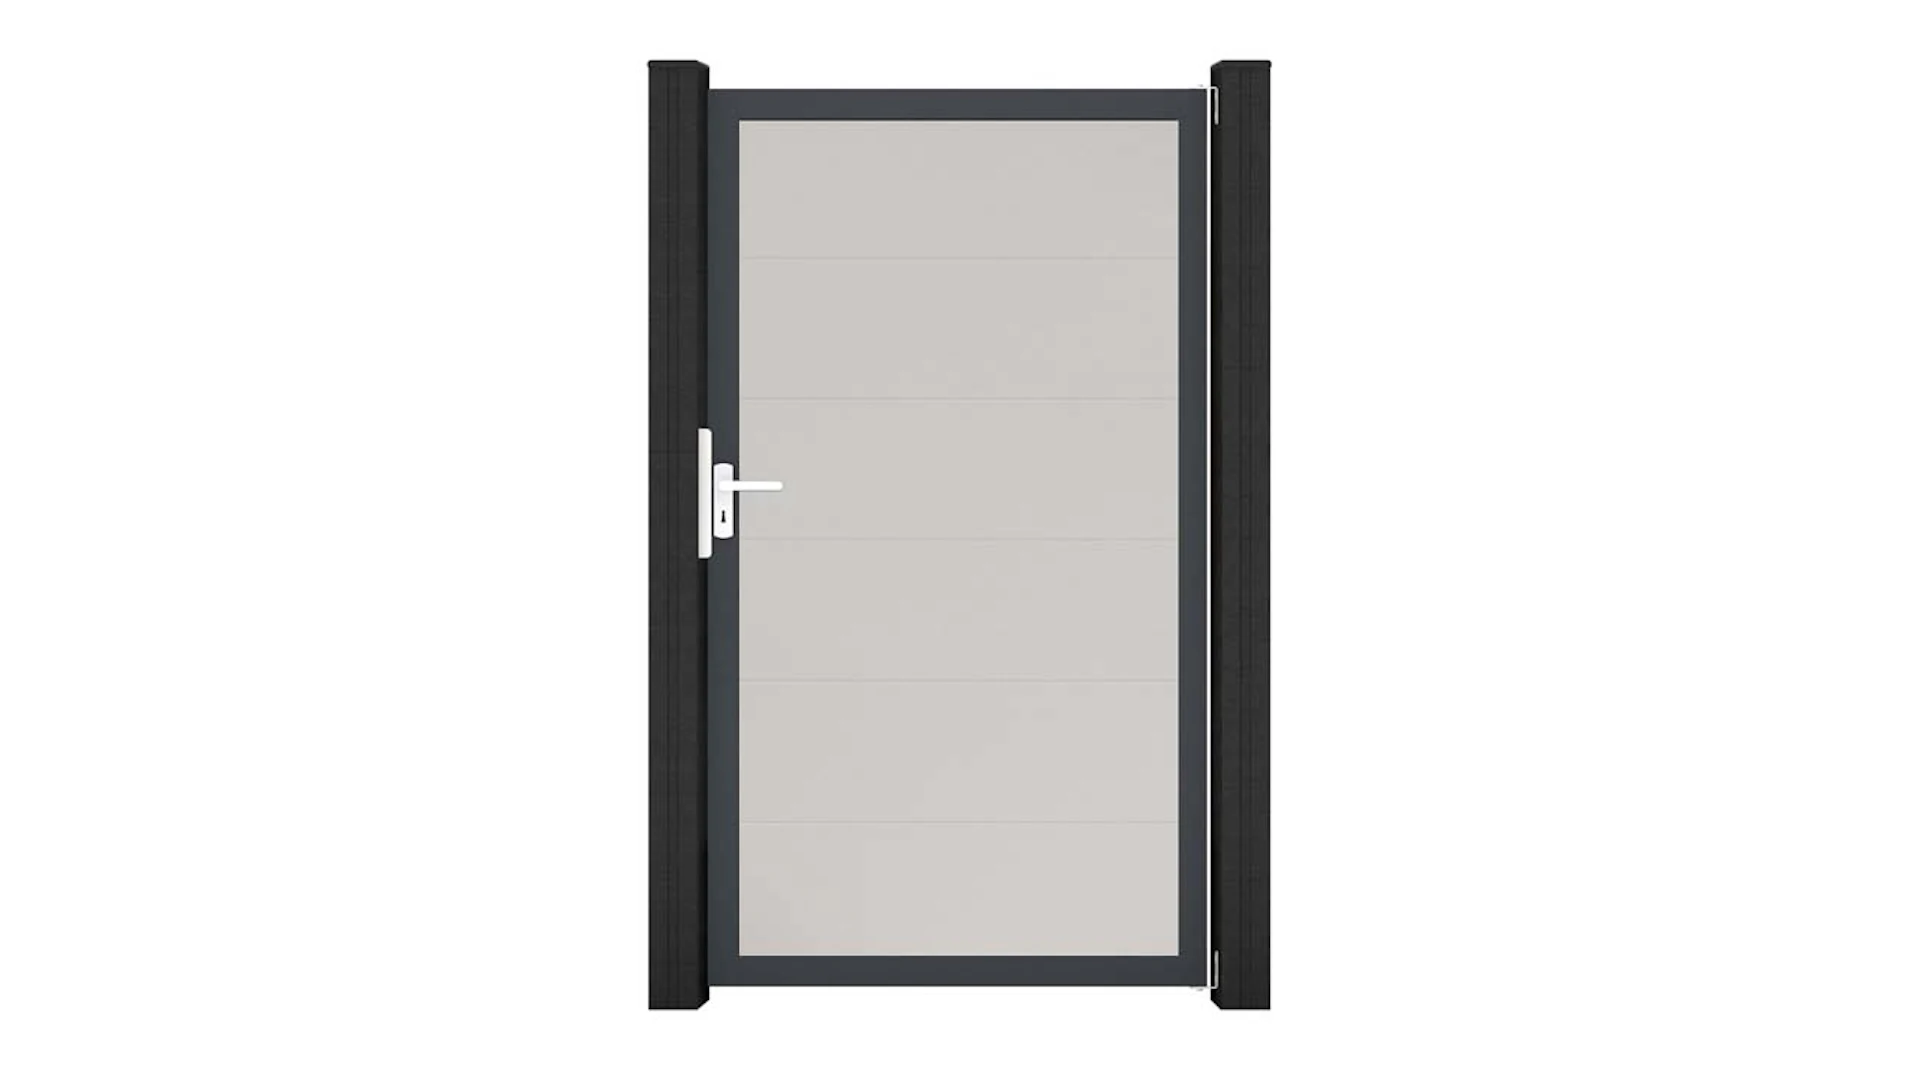 planeo Basic - PVC plug-in fence universal gate white with aluminium frame in anthracite | DB703 100 x 180 cm